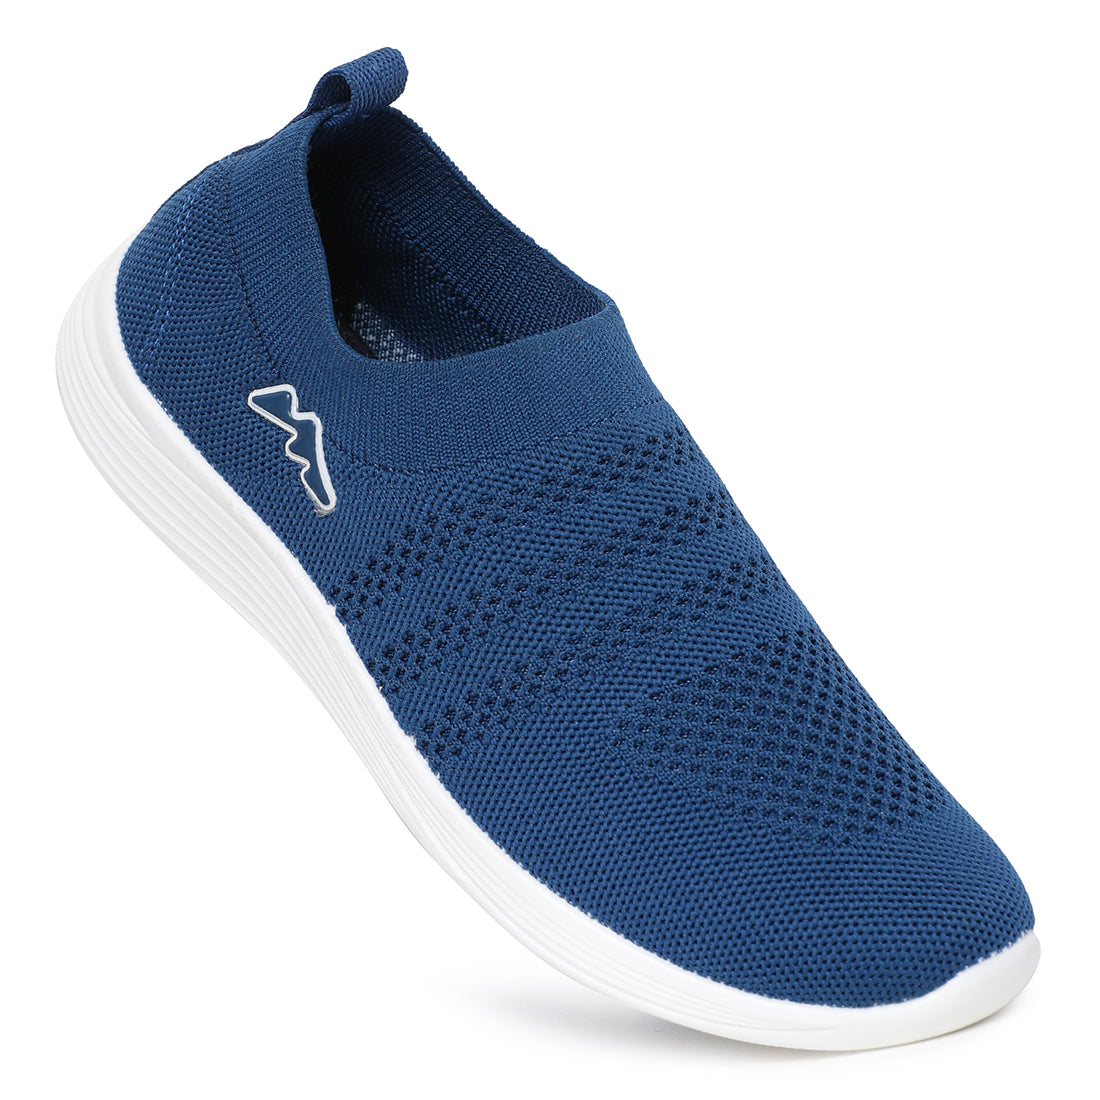 Stimulus PUSTL5020AP Blue Stylish Daily Comfortable Casual Shoes For Women